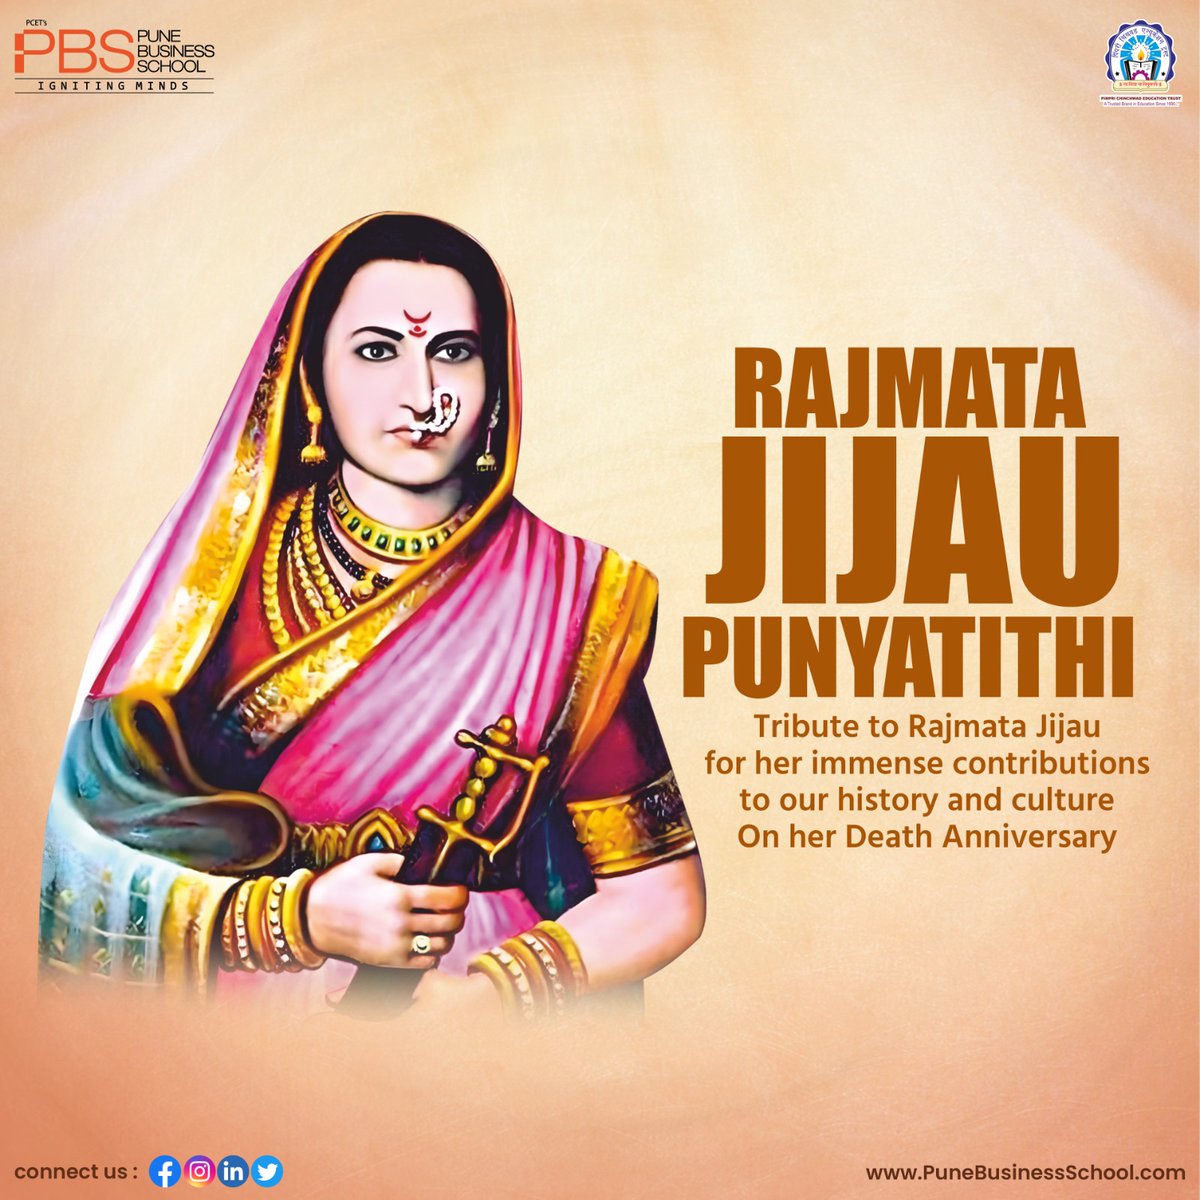 We pay tribute to #RajmataJijau for her immense contributions to our history & culture. Her legacy lives on, reminding us of the importance of determination, compassion, & power of a mother's love.

#PCET #PBS #jijau #shivajimaharaj #swarajya #pune #JayJijauJayShivray #tribute